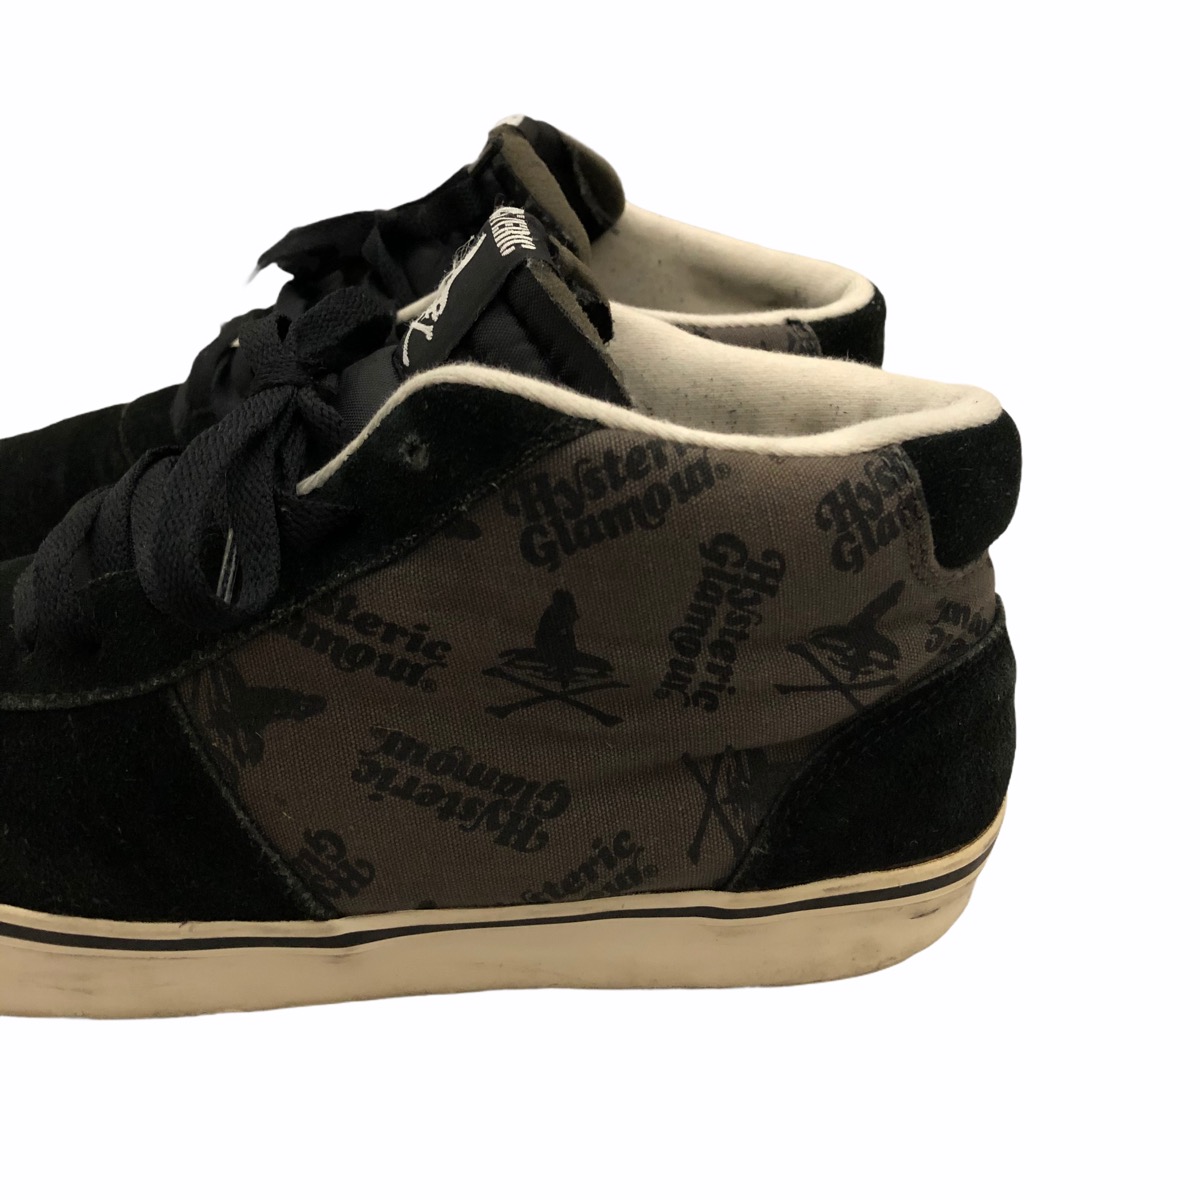 Hysteric Glamours rare sneakers - 2